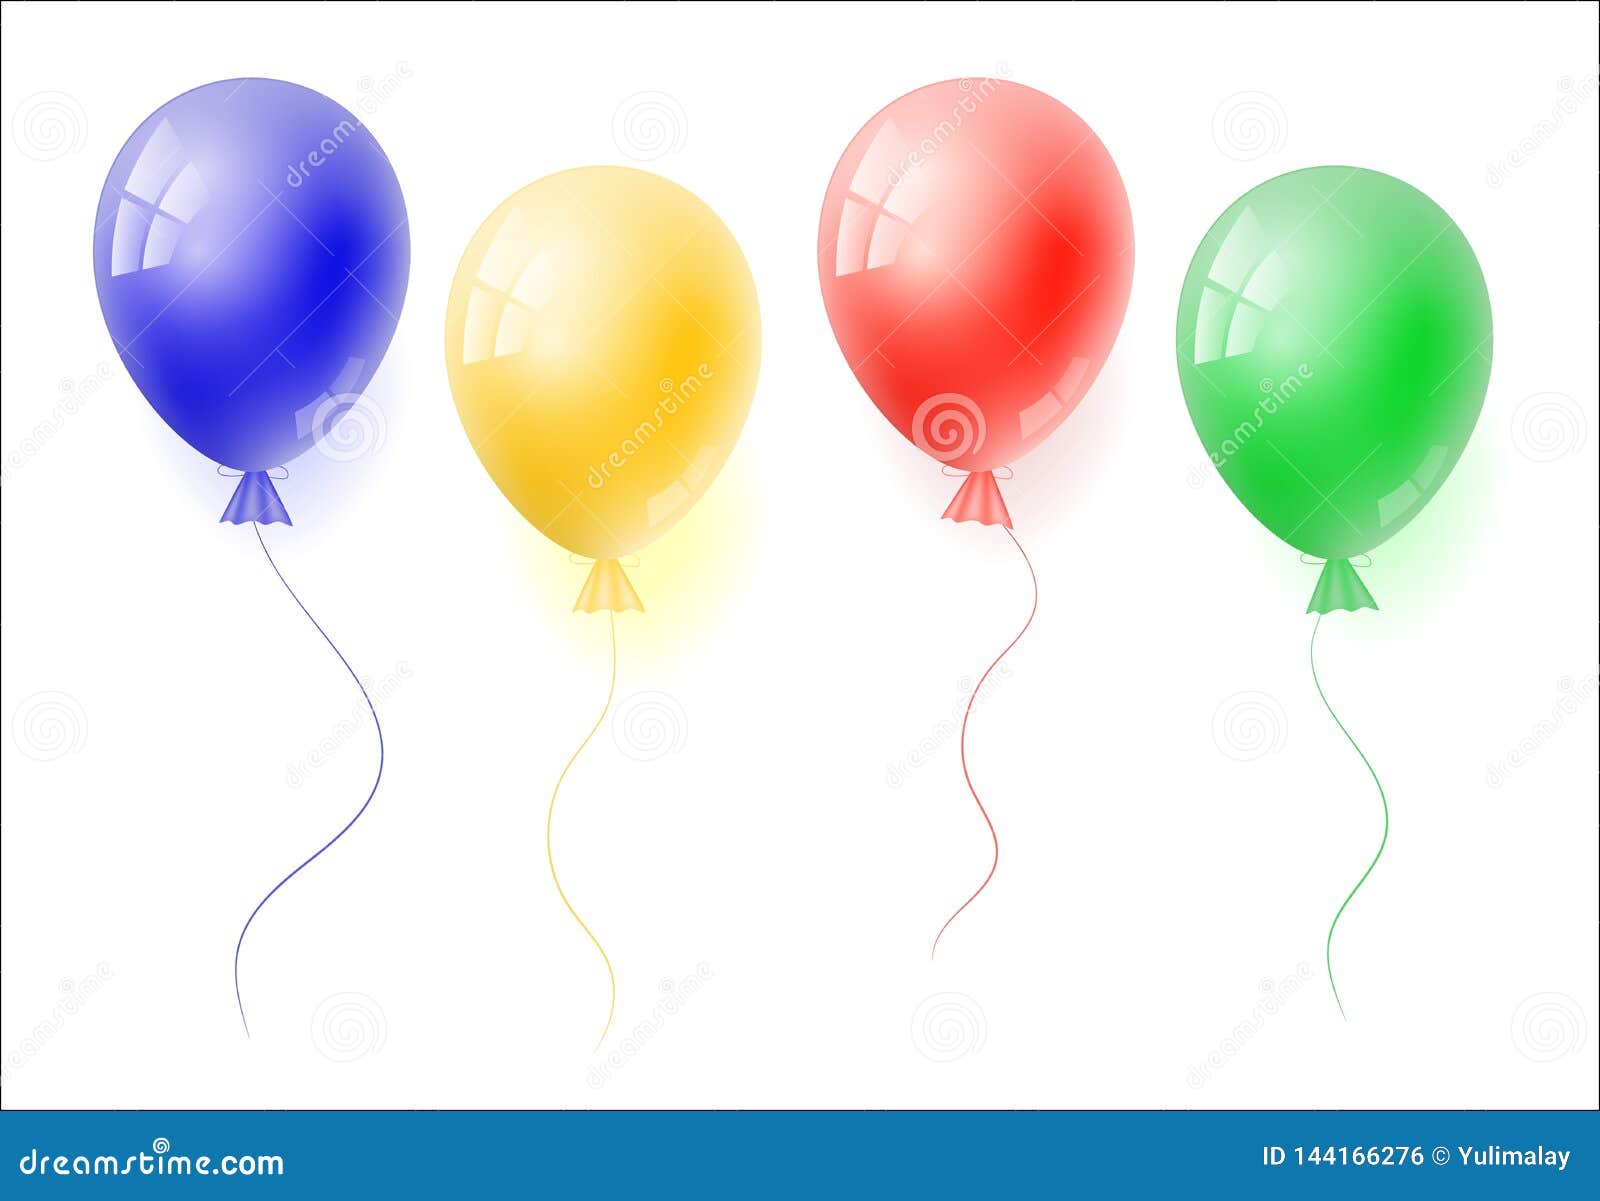 Vector 3d Realistic Balloon Stock Vector Illustration Of Party Images, Photos, Reviews